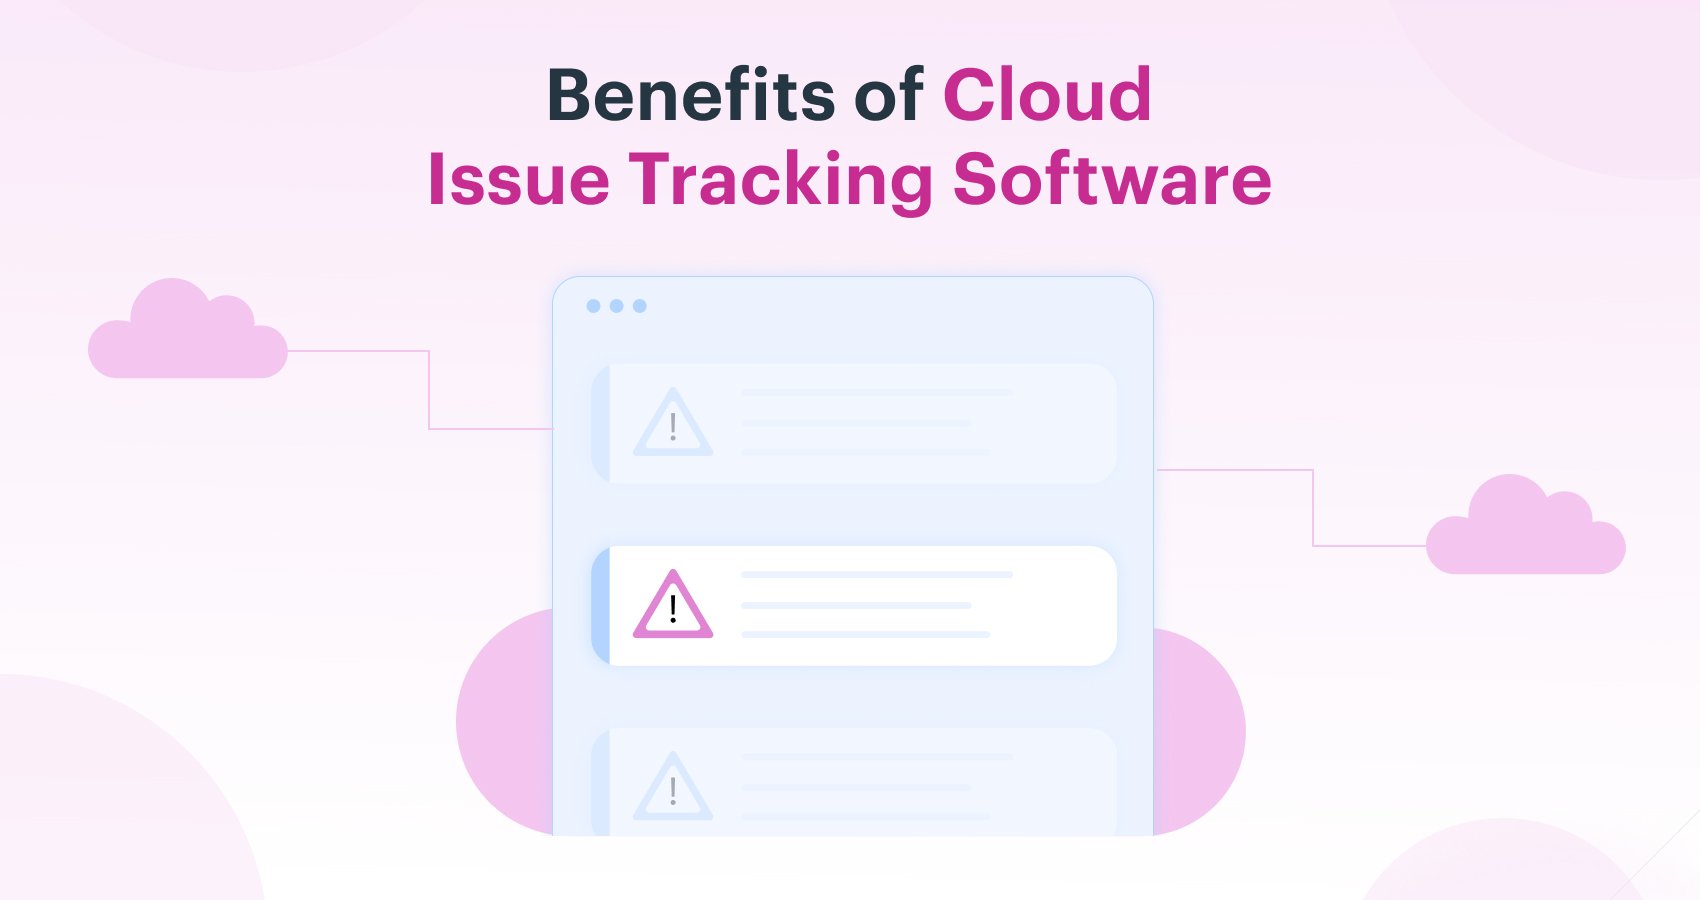 Benefits of Cloud Issue Tracking Software